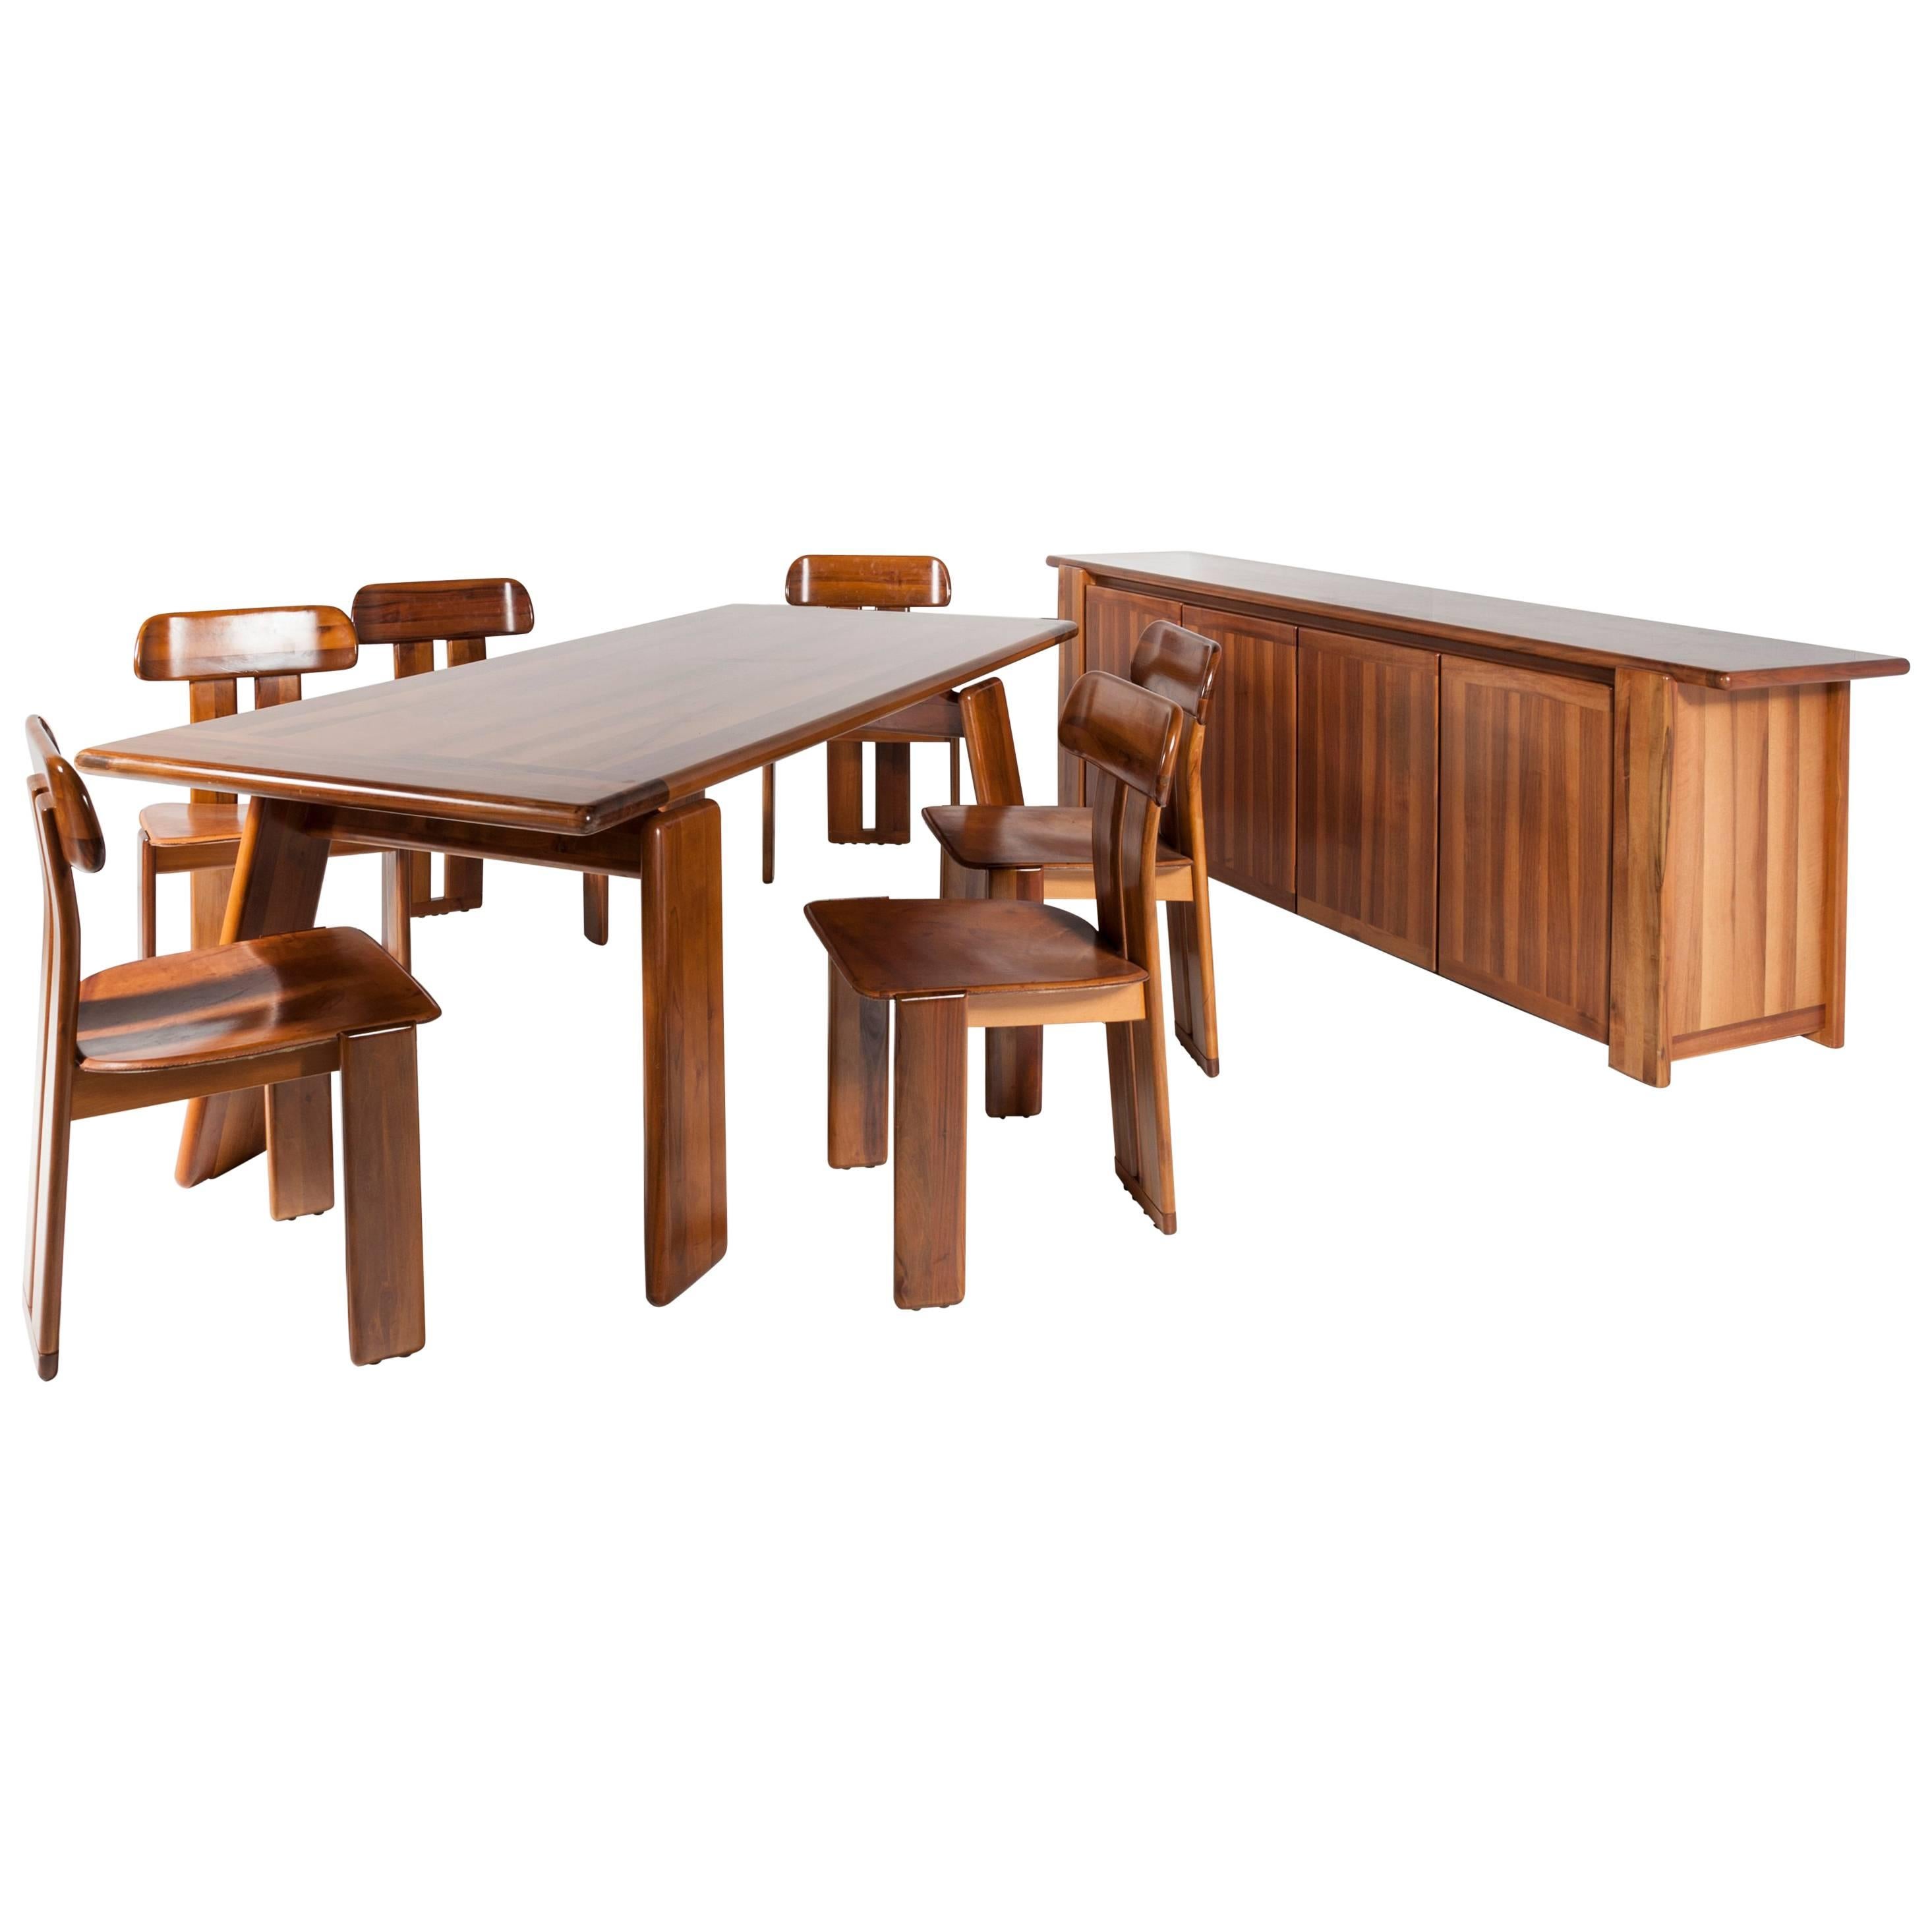 Full Set of Dining Room by Tobia & Afra Scarpa for Maxalto, circa 1970